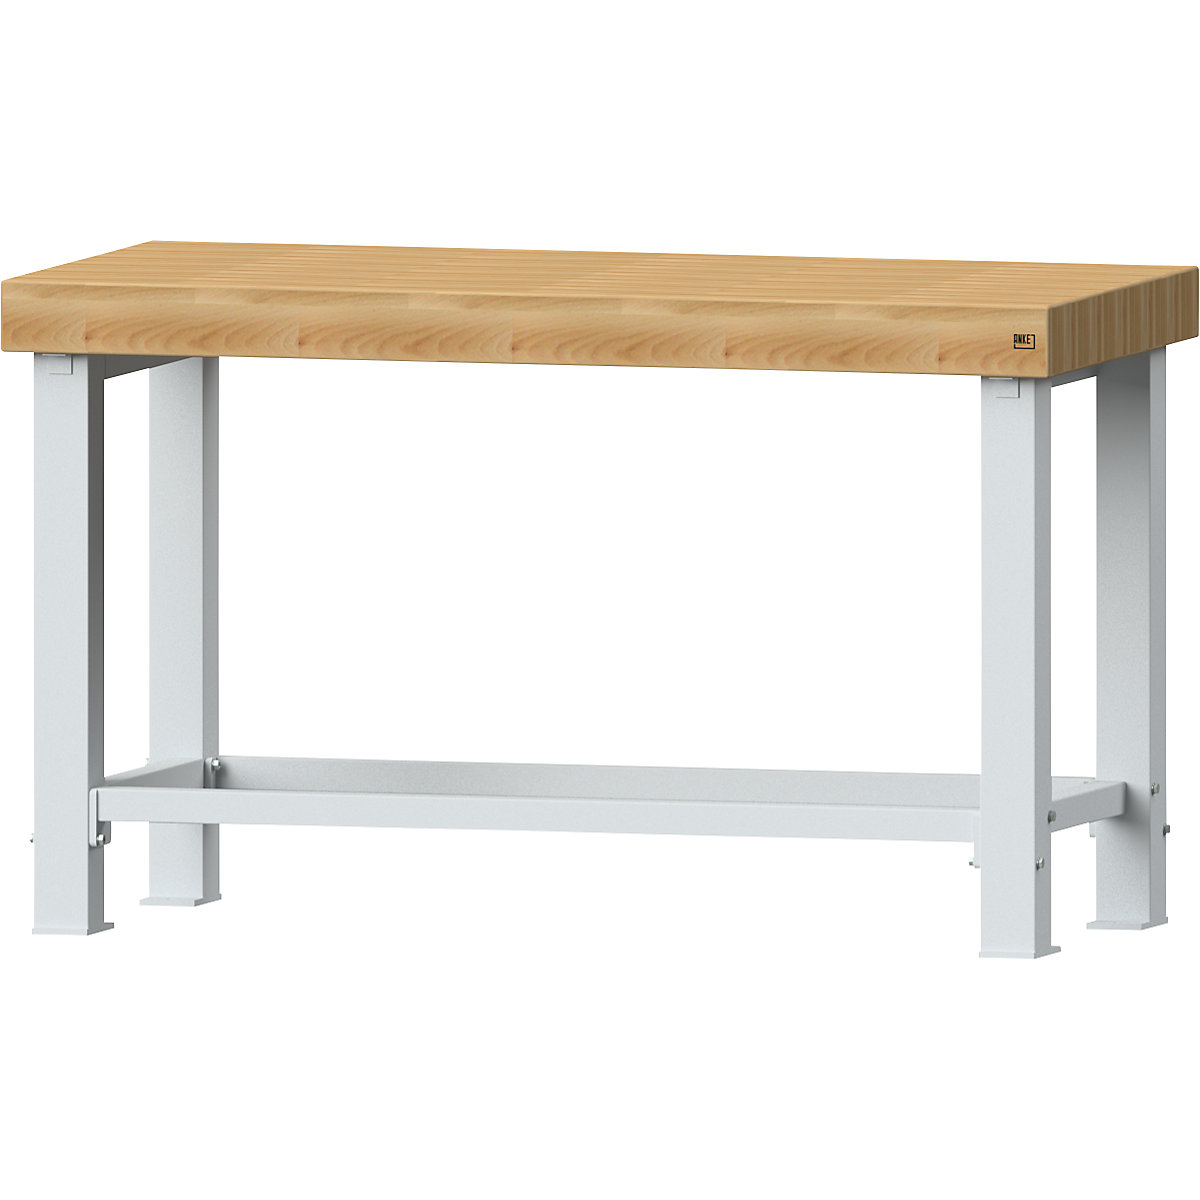 Heavy duty workbench – ANKE, worktop width 1500 mm, without substructures, worktop thickness 100 mm-2